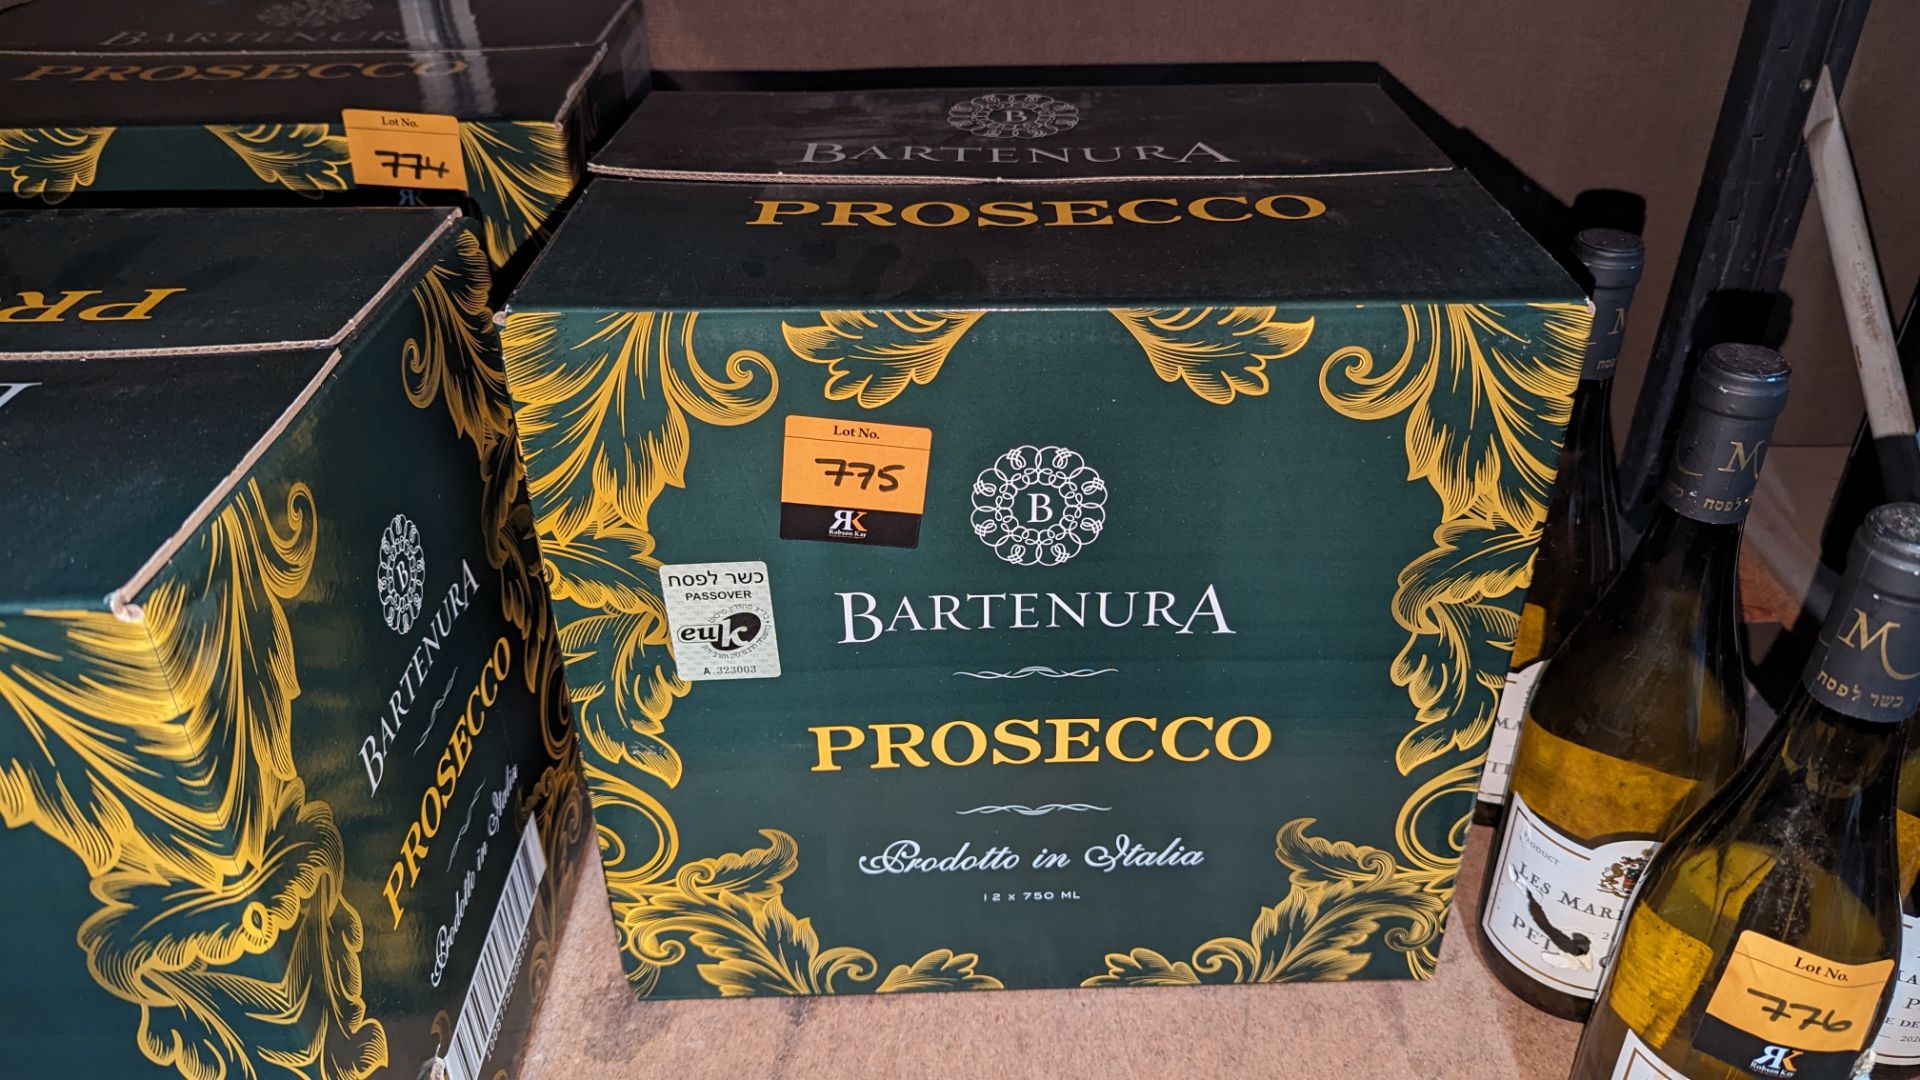 12 bottles of Bartenura Brut Prosecco Italian white sparkling wine sold under AWRS number XQAW000001